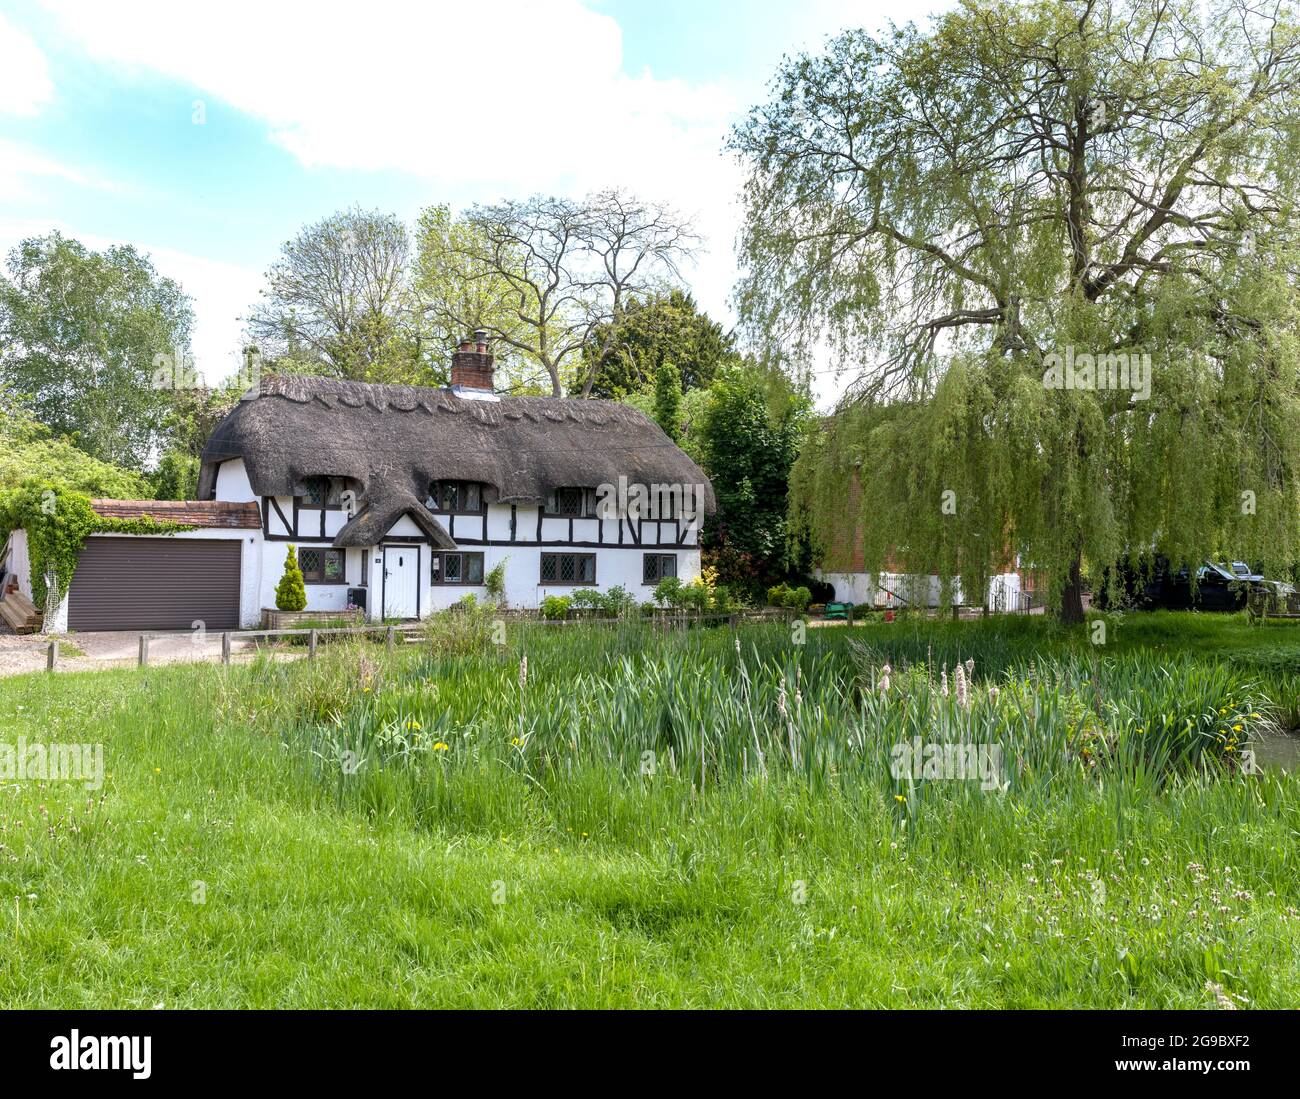 The Duck pond in the centre of the village Oakley with traditional thatched cottages in the background, Oakley, Hampshire, England, UK. Stock Photo